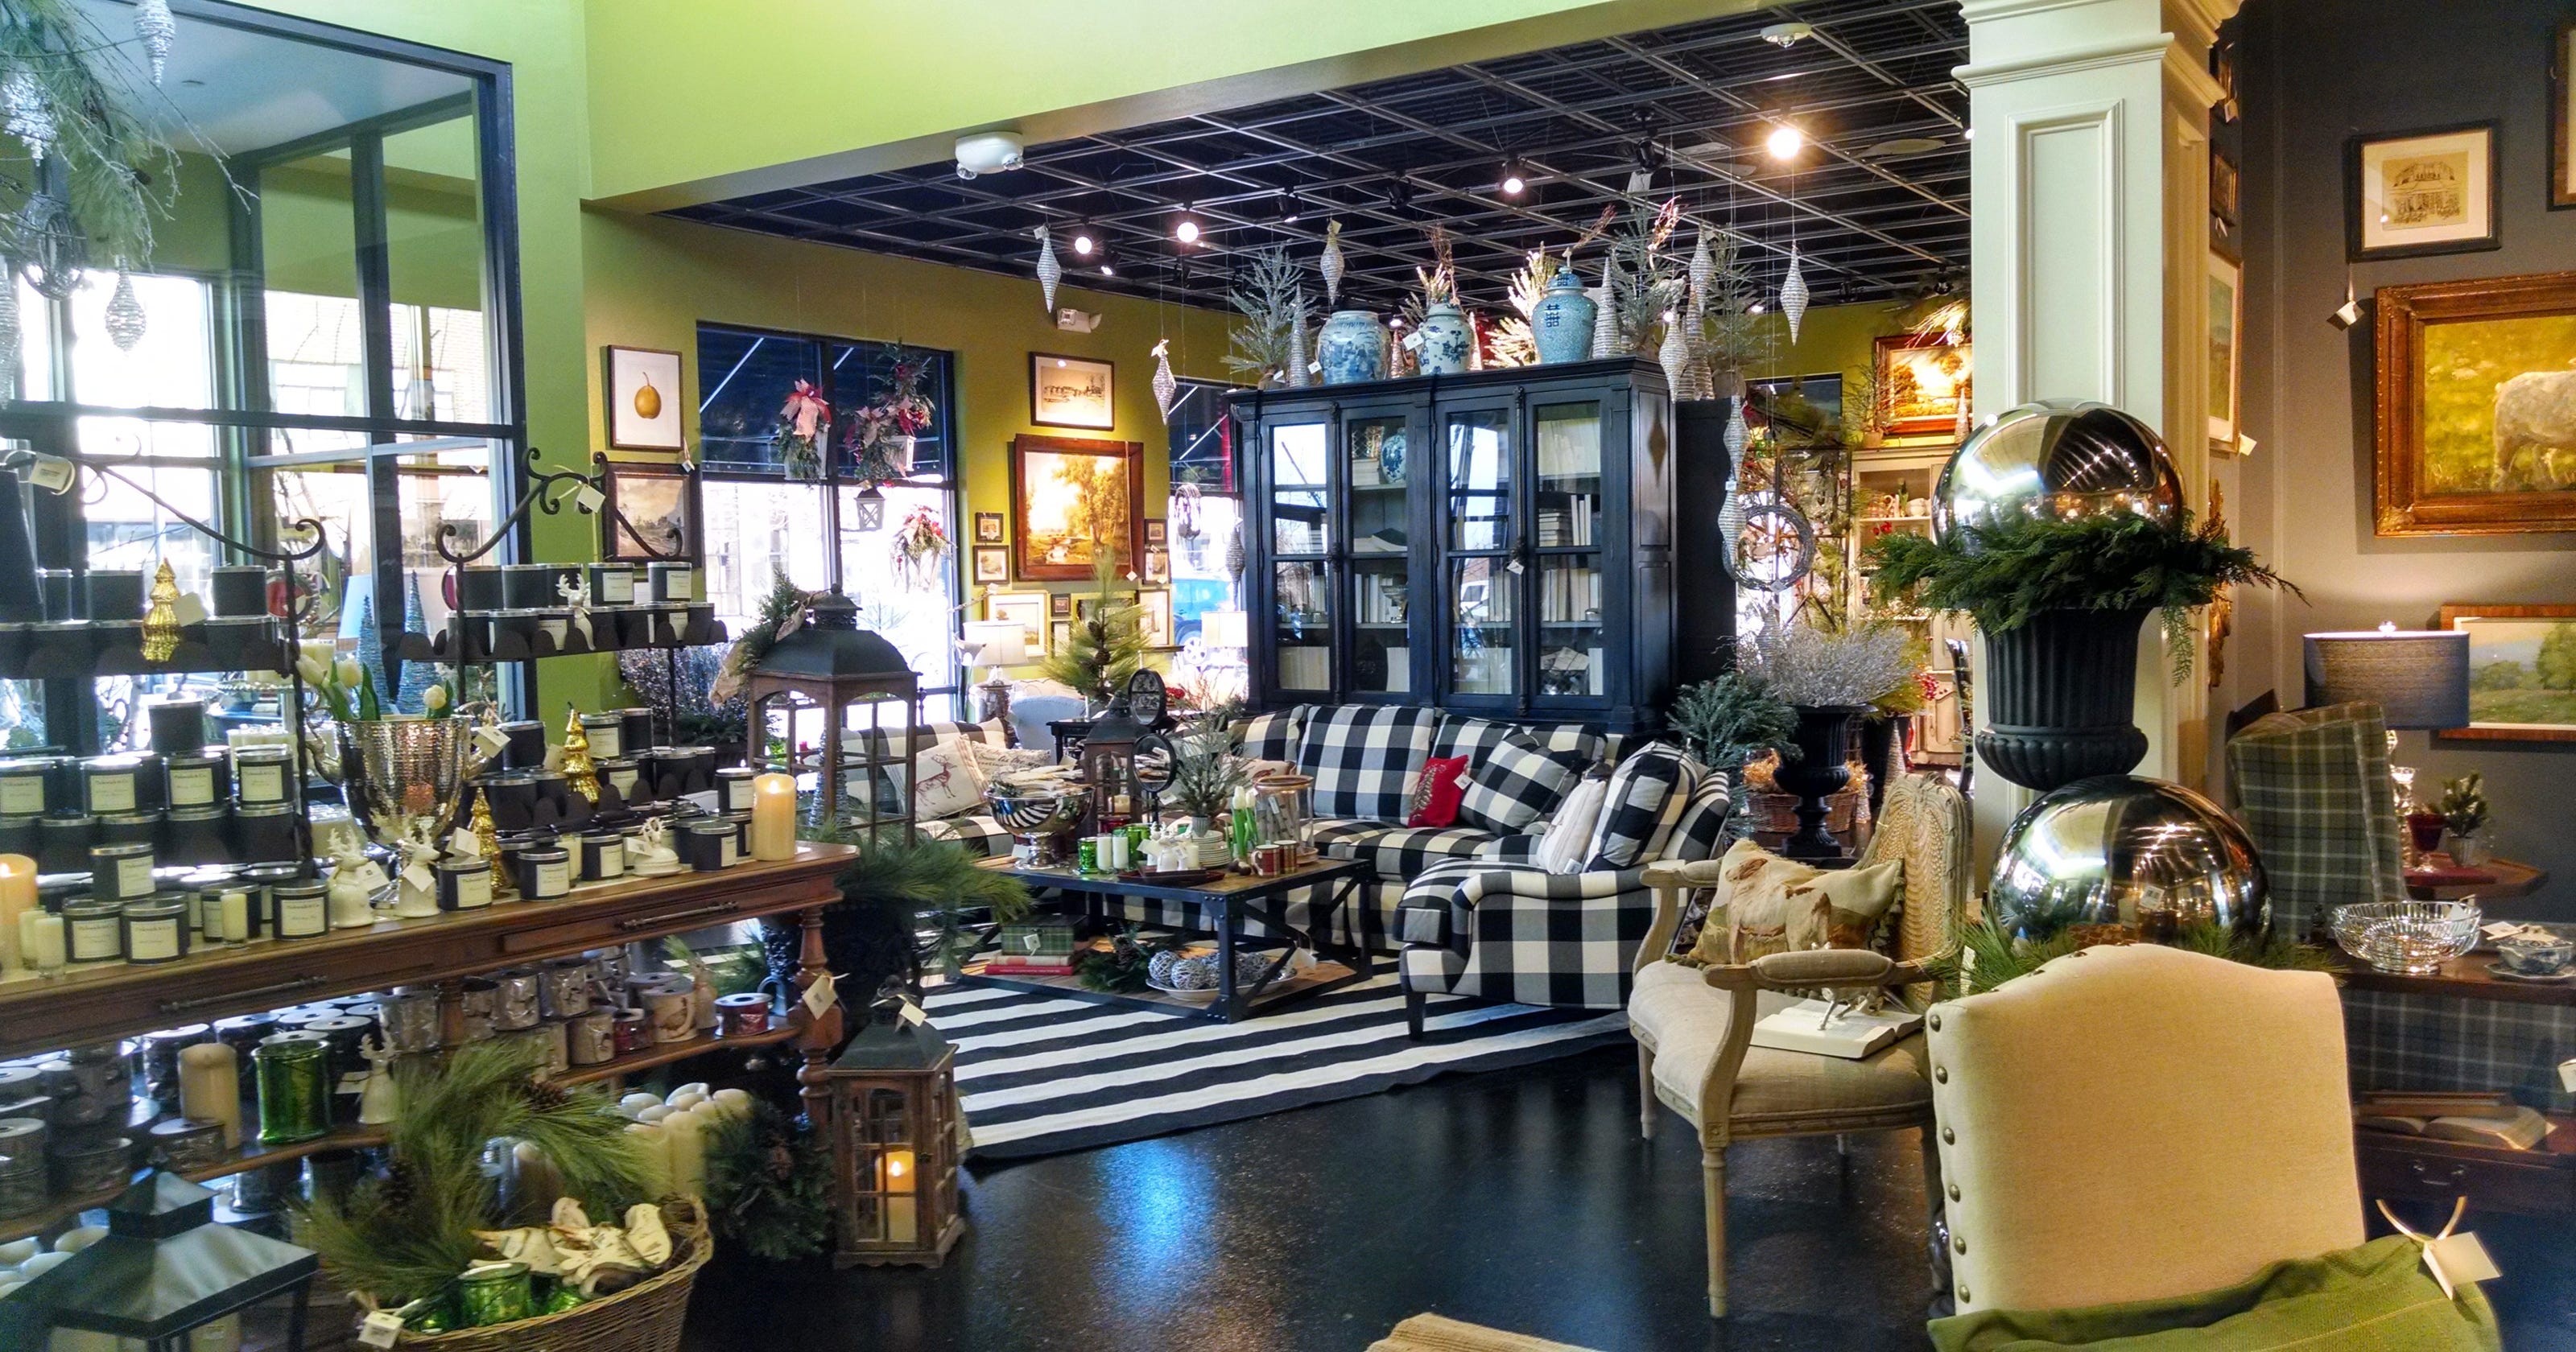 Home furnishings store opens in West Des Moines